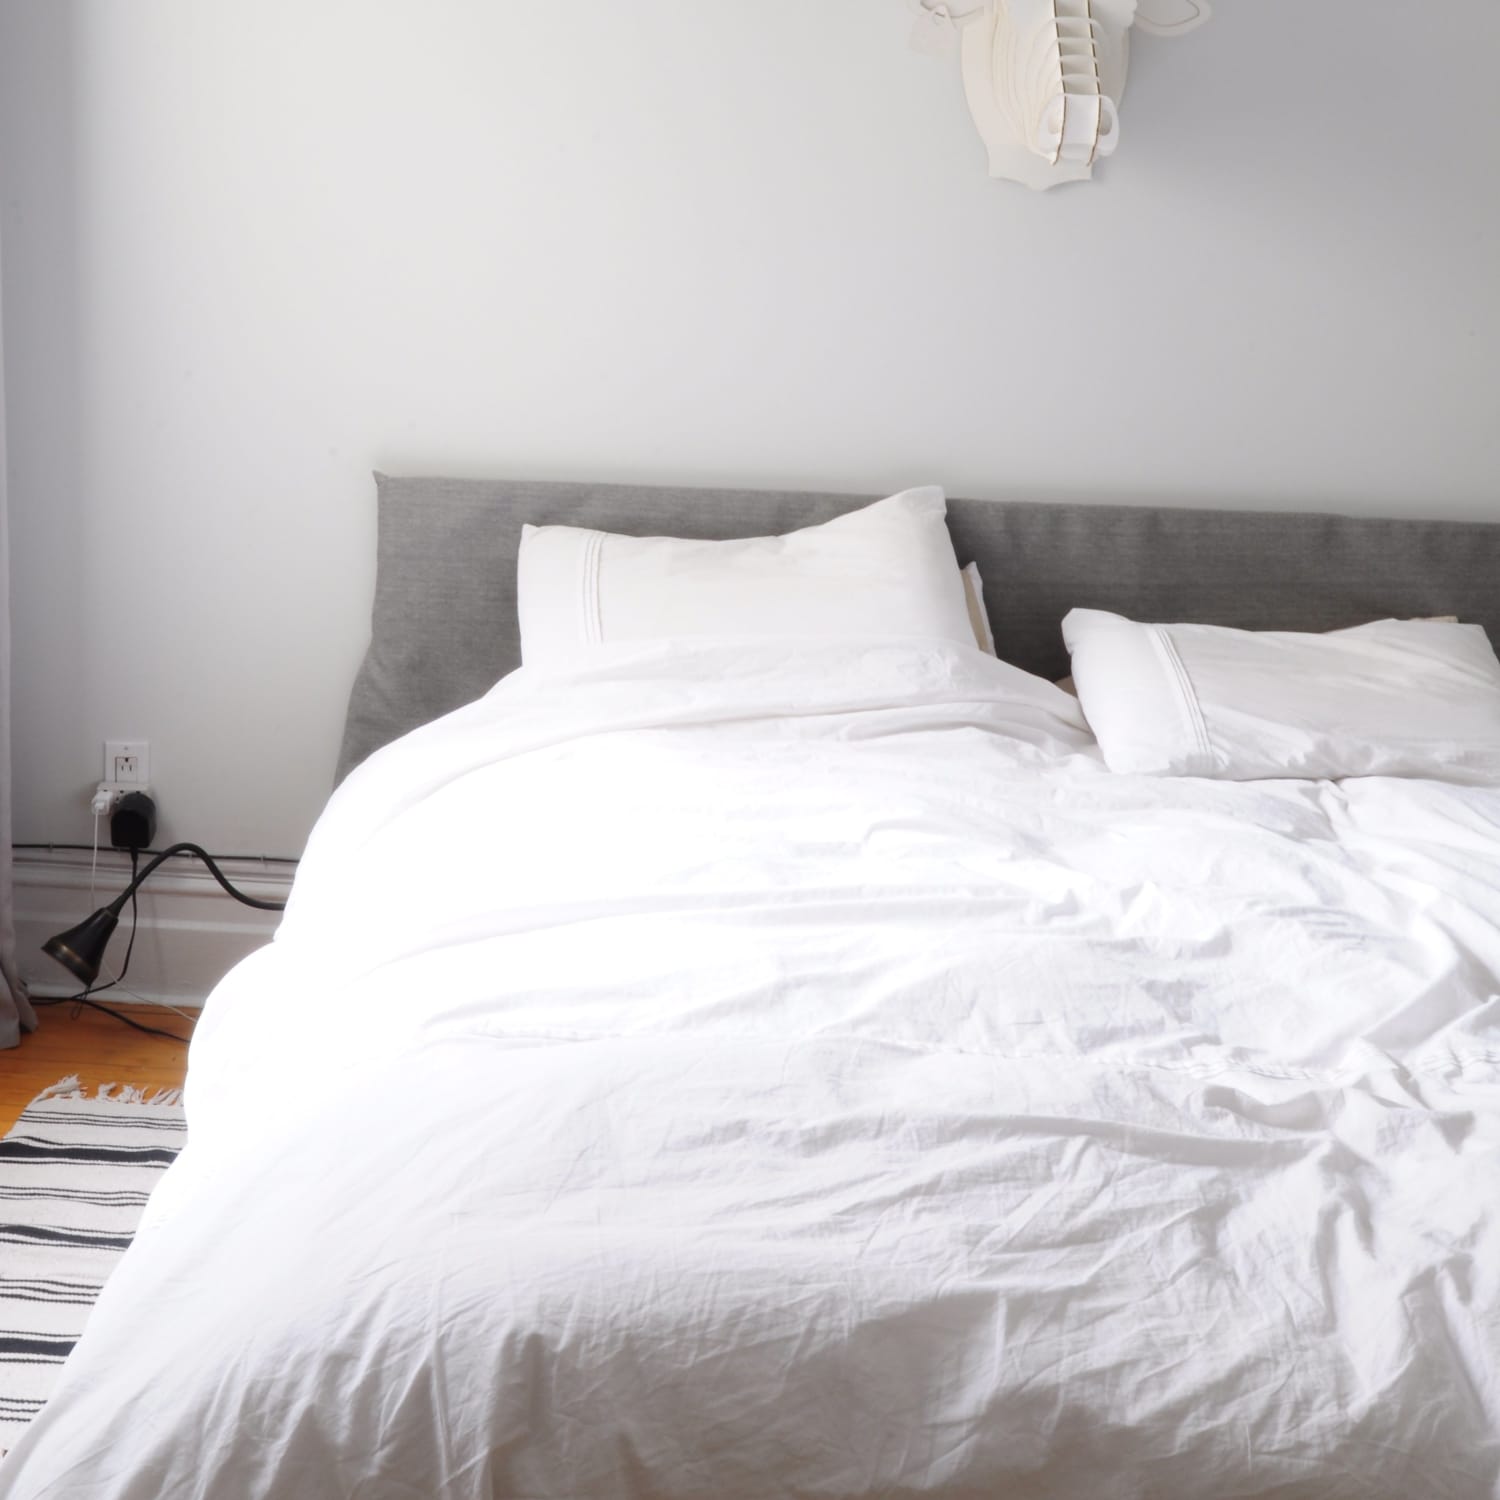 How To Clean Your Bedroom In An Hour For A More Restful Space